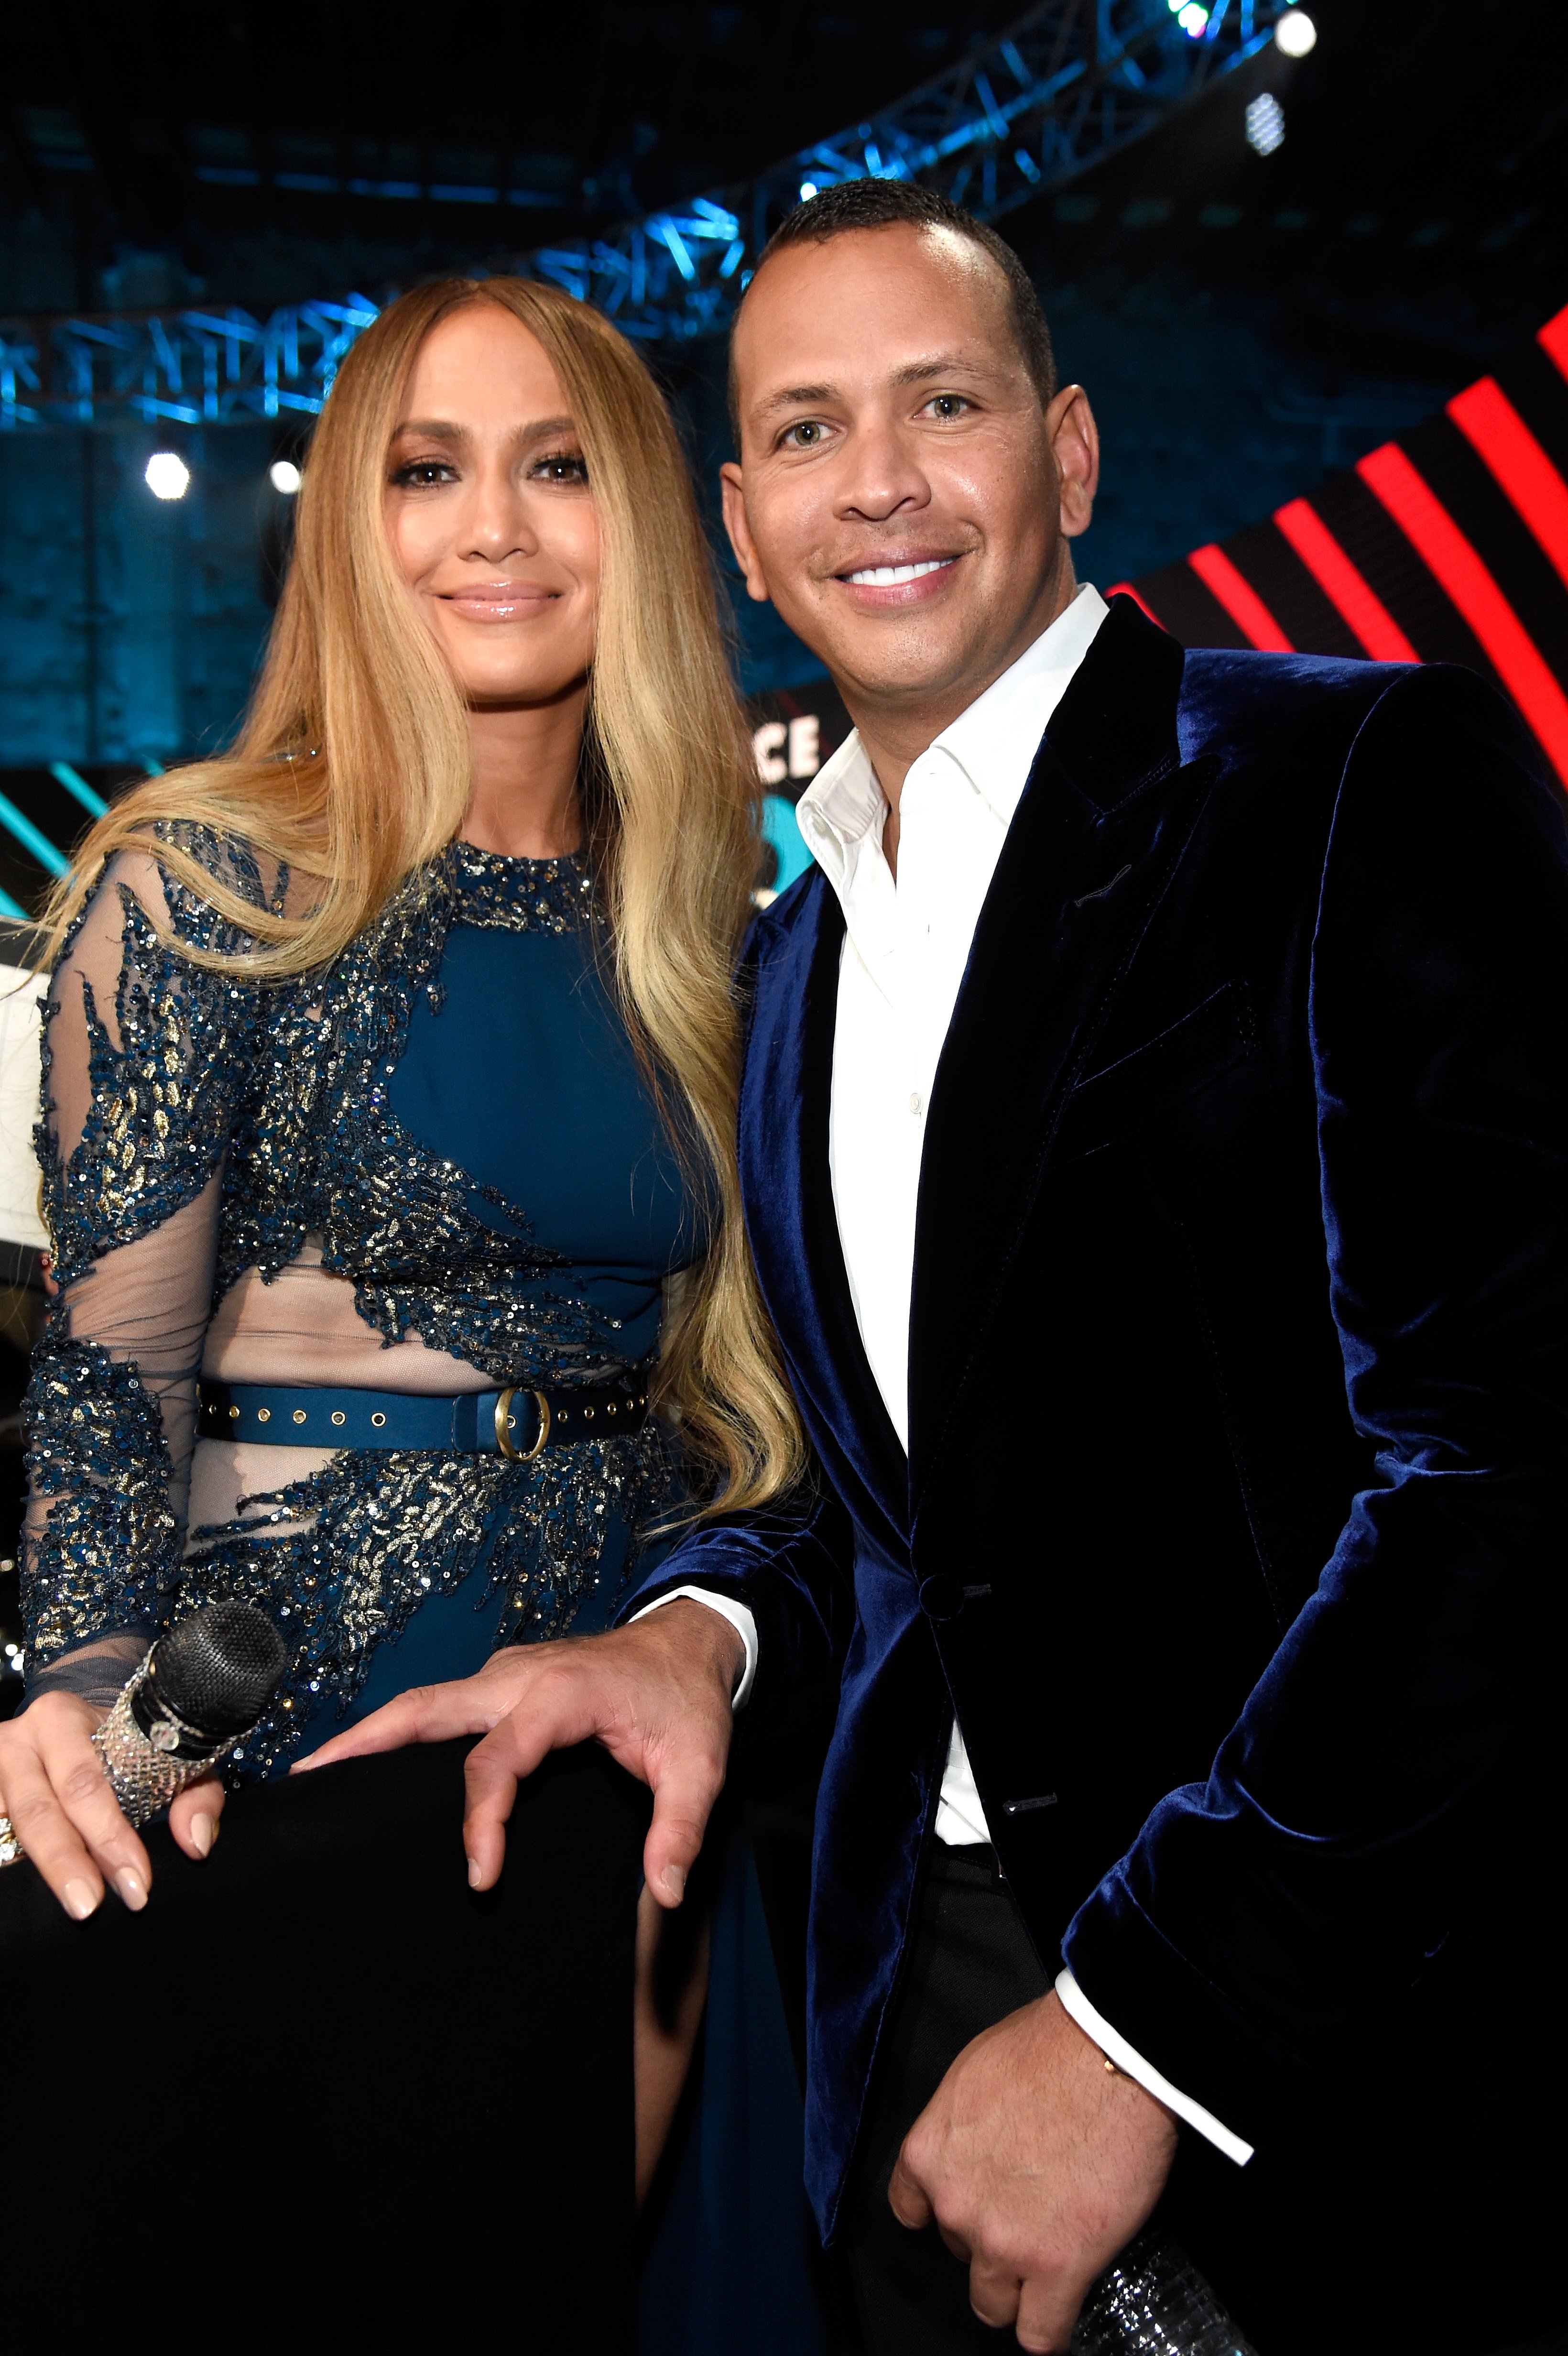 Jennifer Lopez and Alex Rodriguez at the "One Voice: Somos Live! A Concert For Disaster Relief" at Universal Studios Lot on October 14, 2017 in Los Angeles, California | Photo: Getty Images